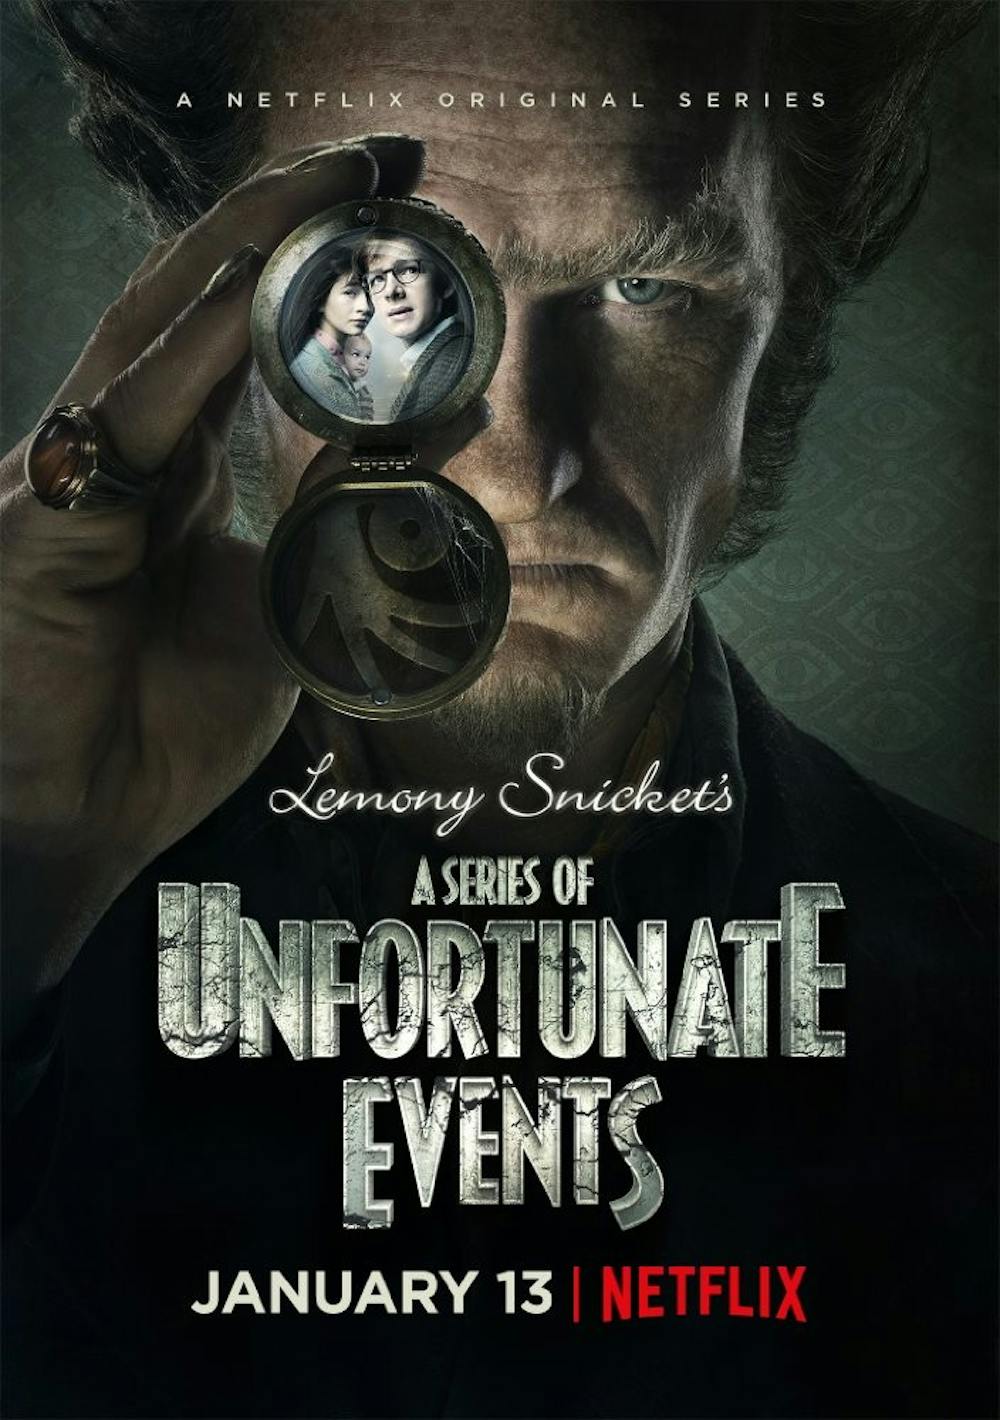 Netflix recently released a television version&nbsp;of "A Series of Unfortunate Events."